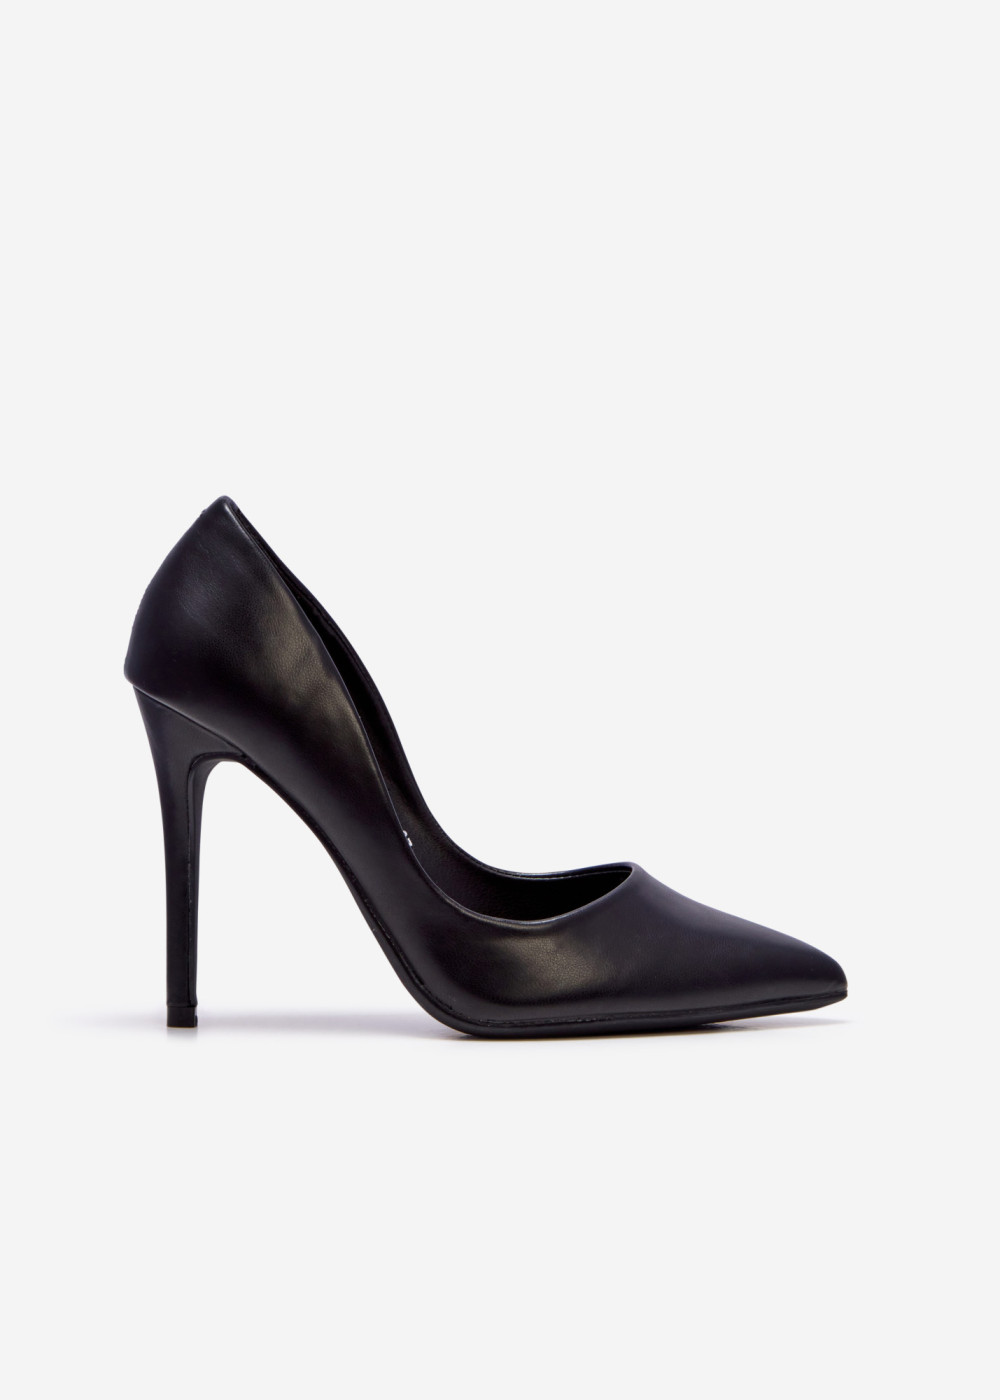 Black heeled court shoes - Shoelace - Women’s Shoes, Bags and Fashion